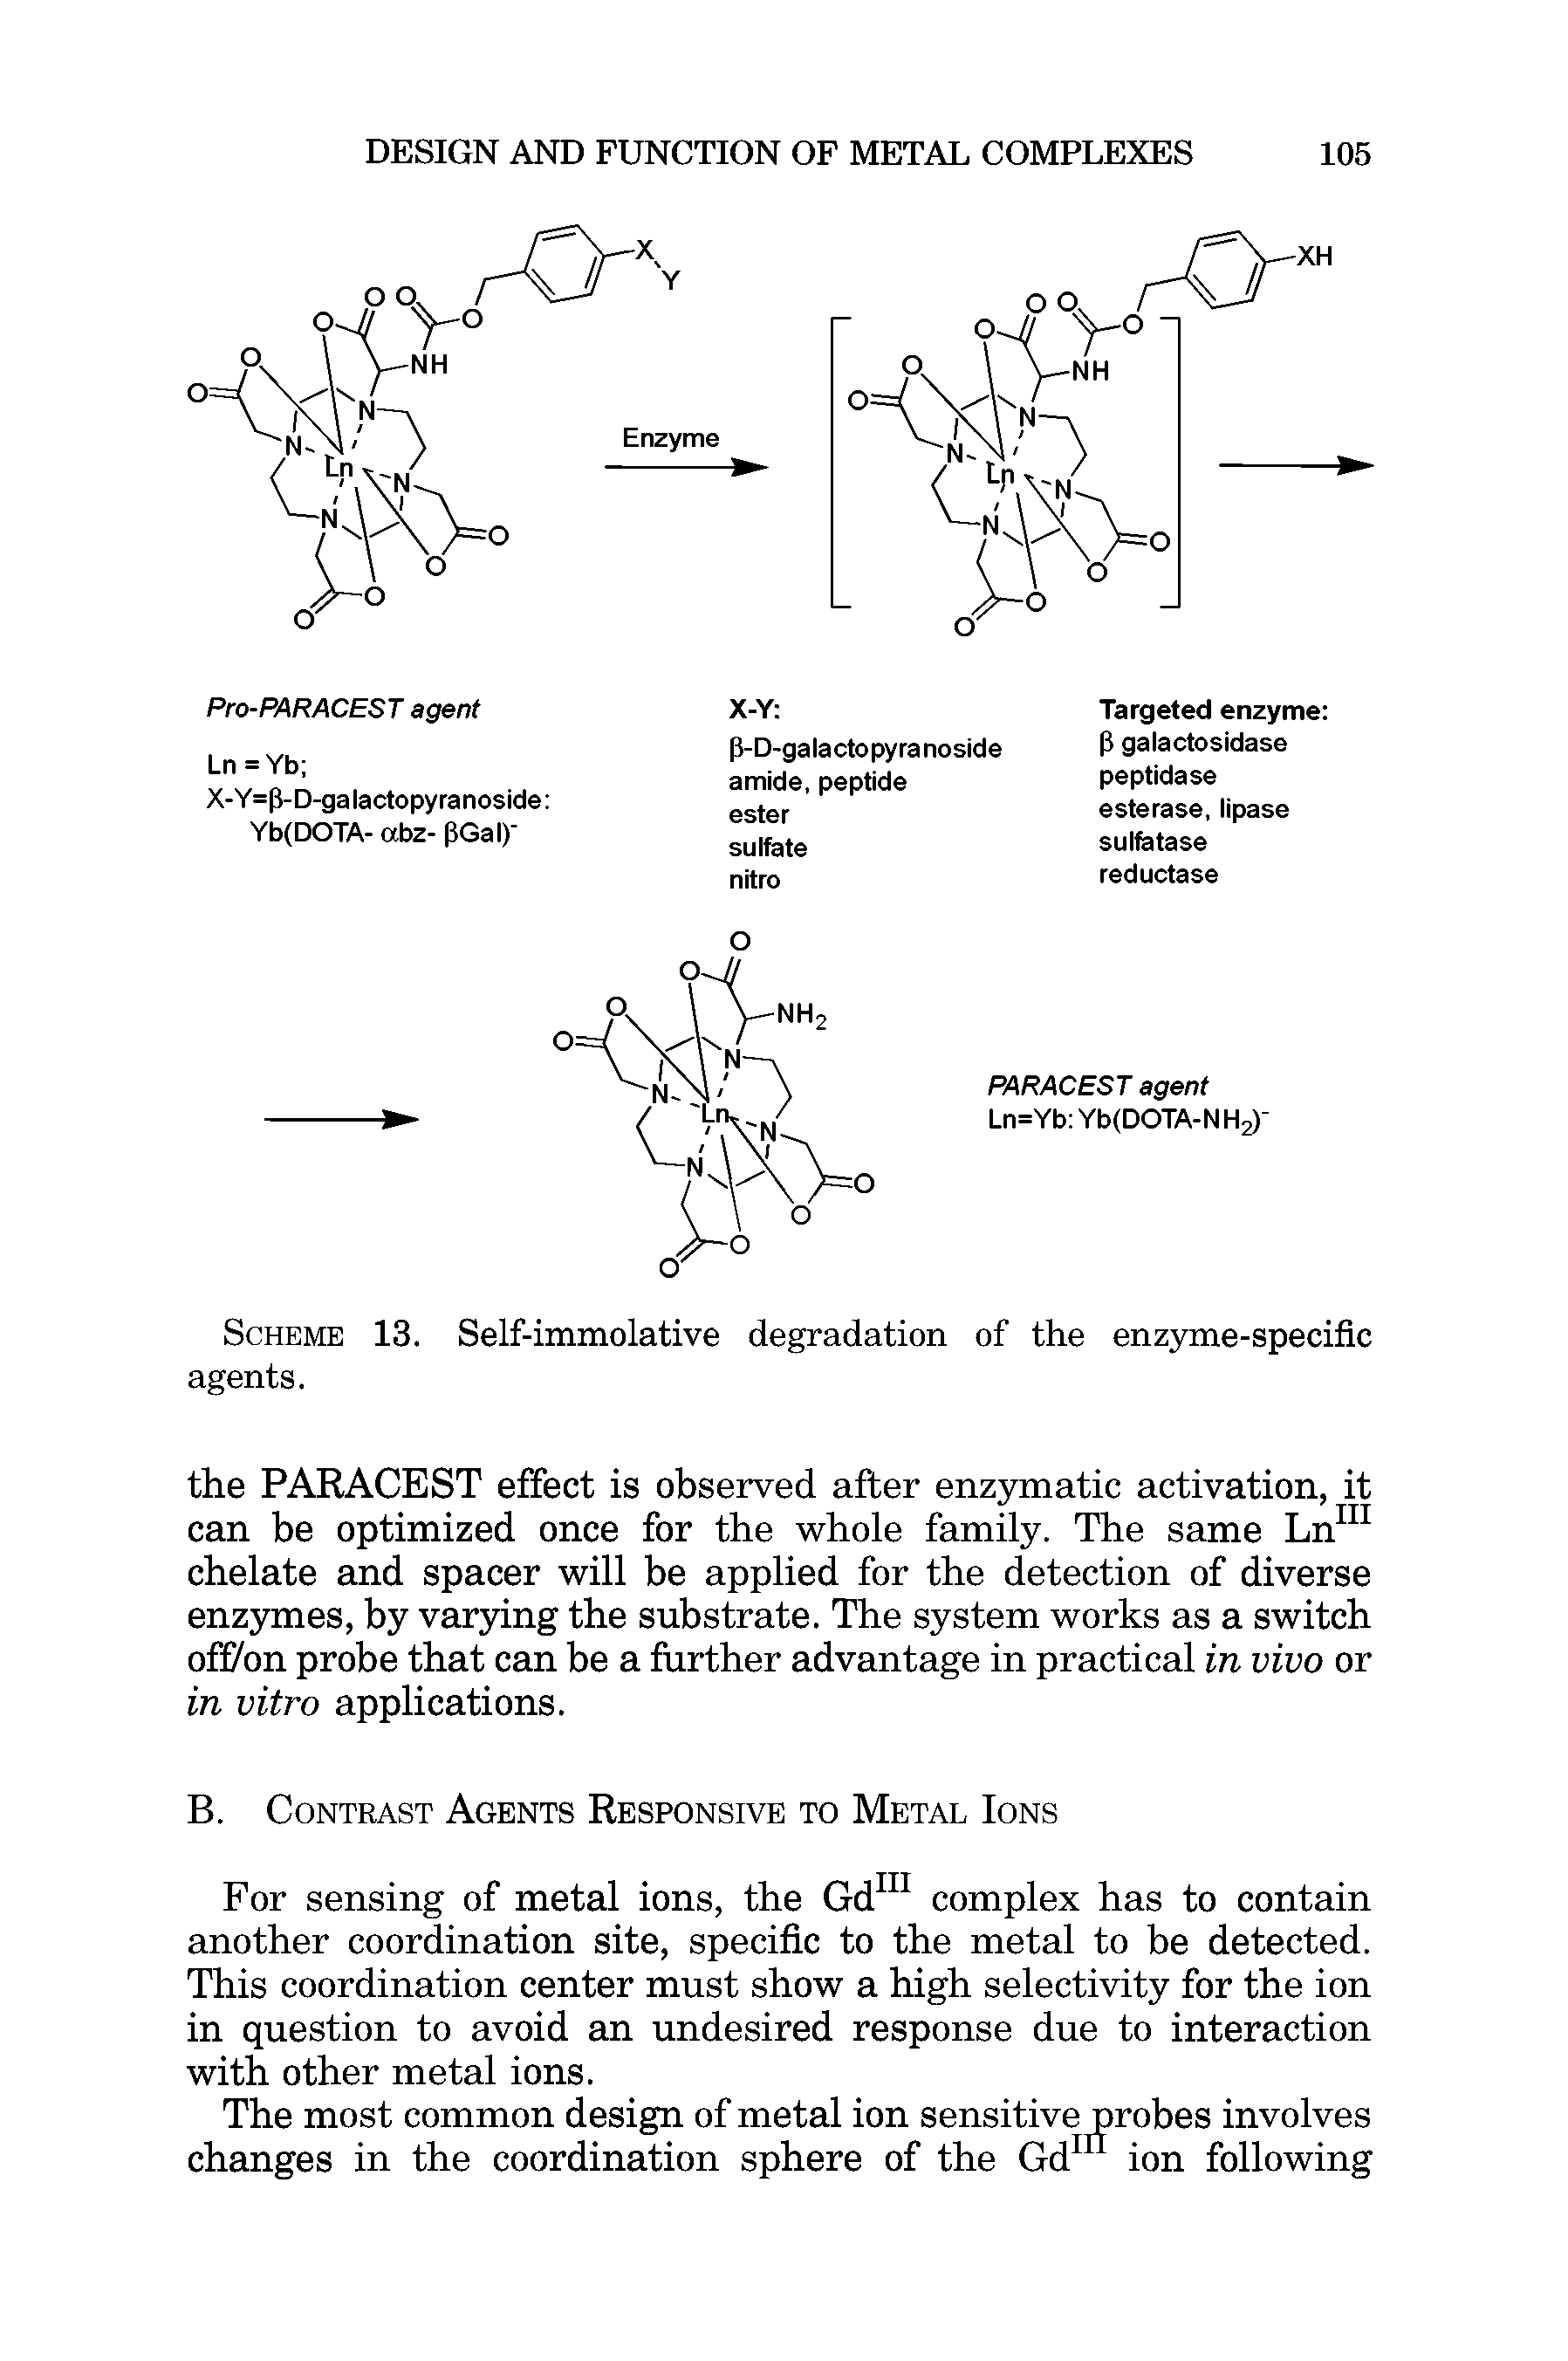 Scheme 13. Self-immolative degradation of the enzyme-specific agents.